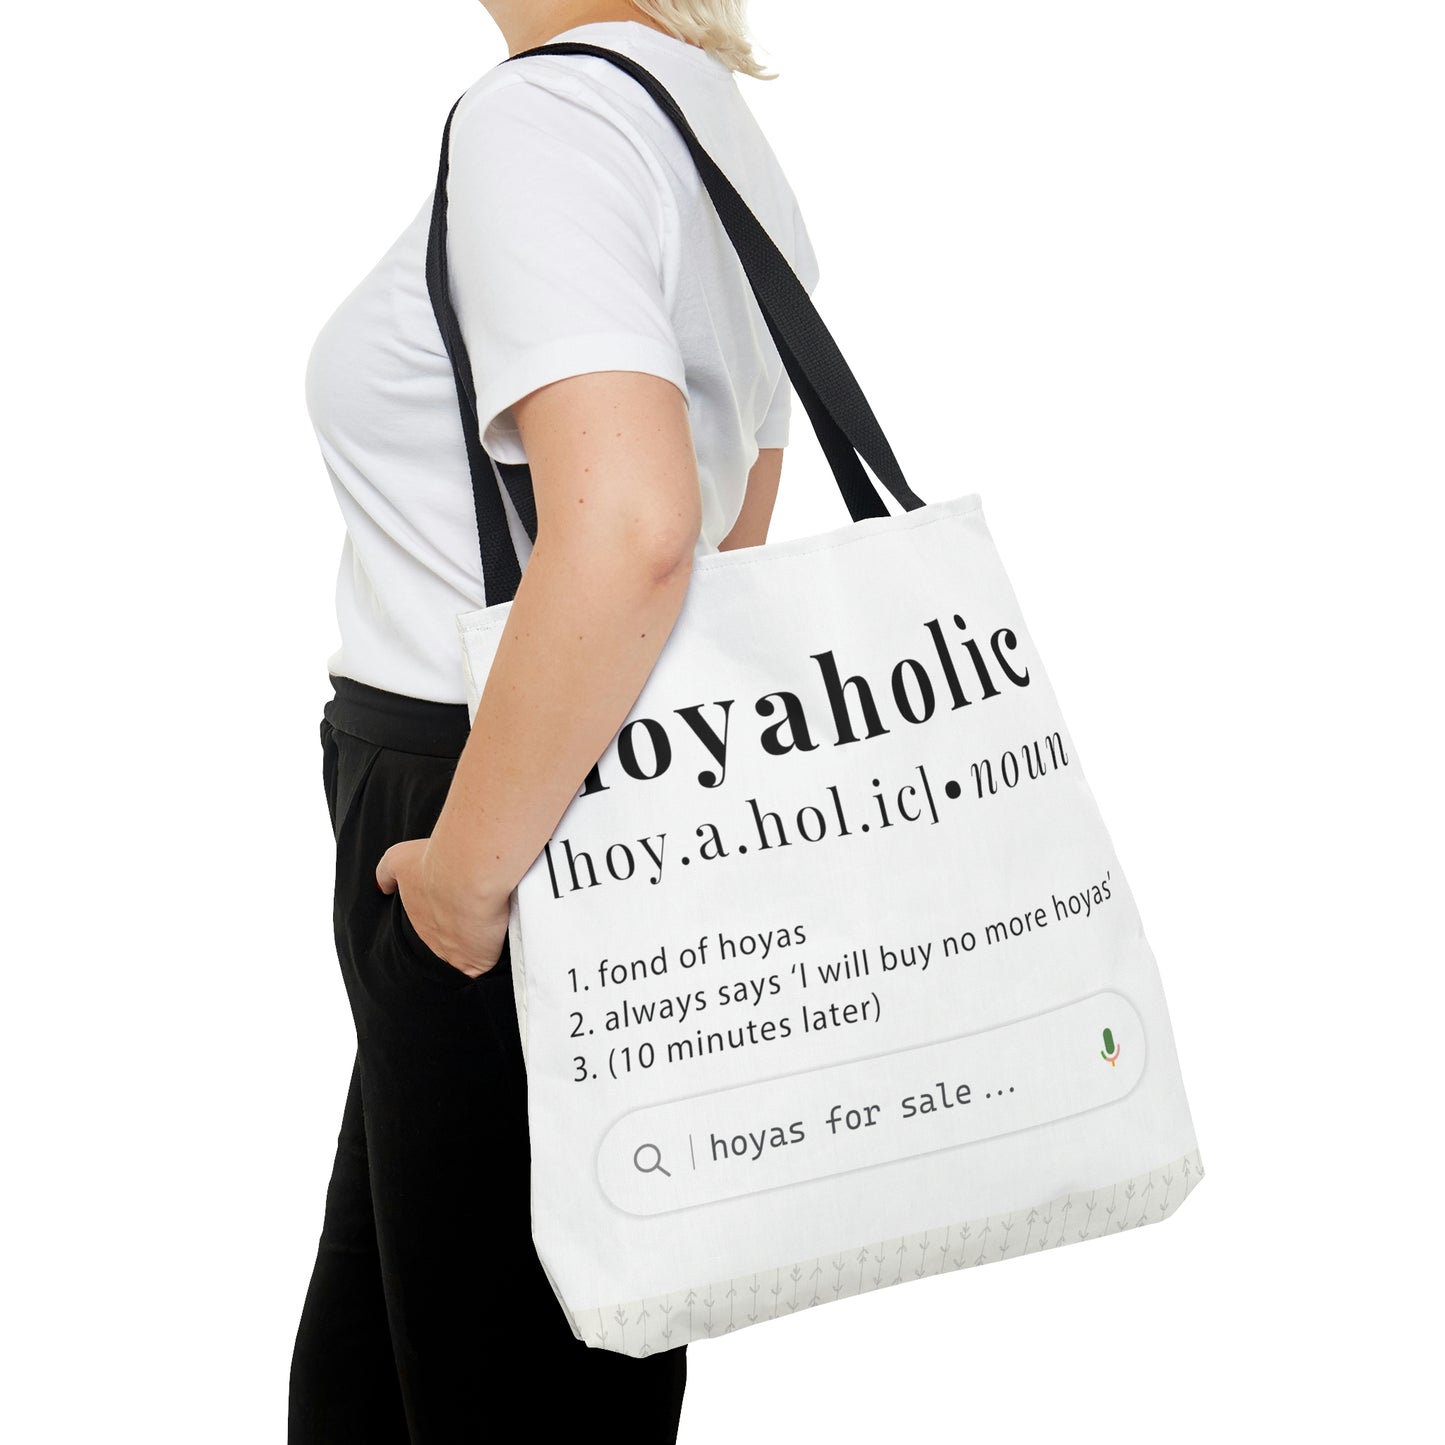 HOYAHOLIC DICTIONARY DEFINITION TOTE BAG